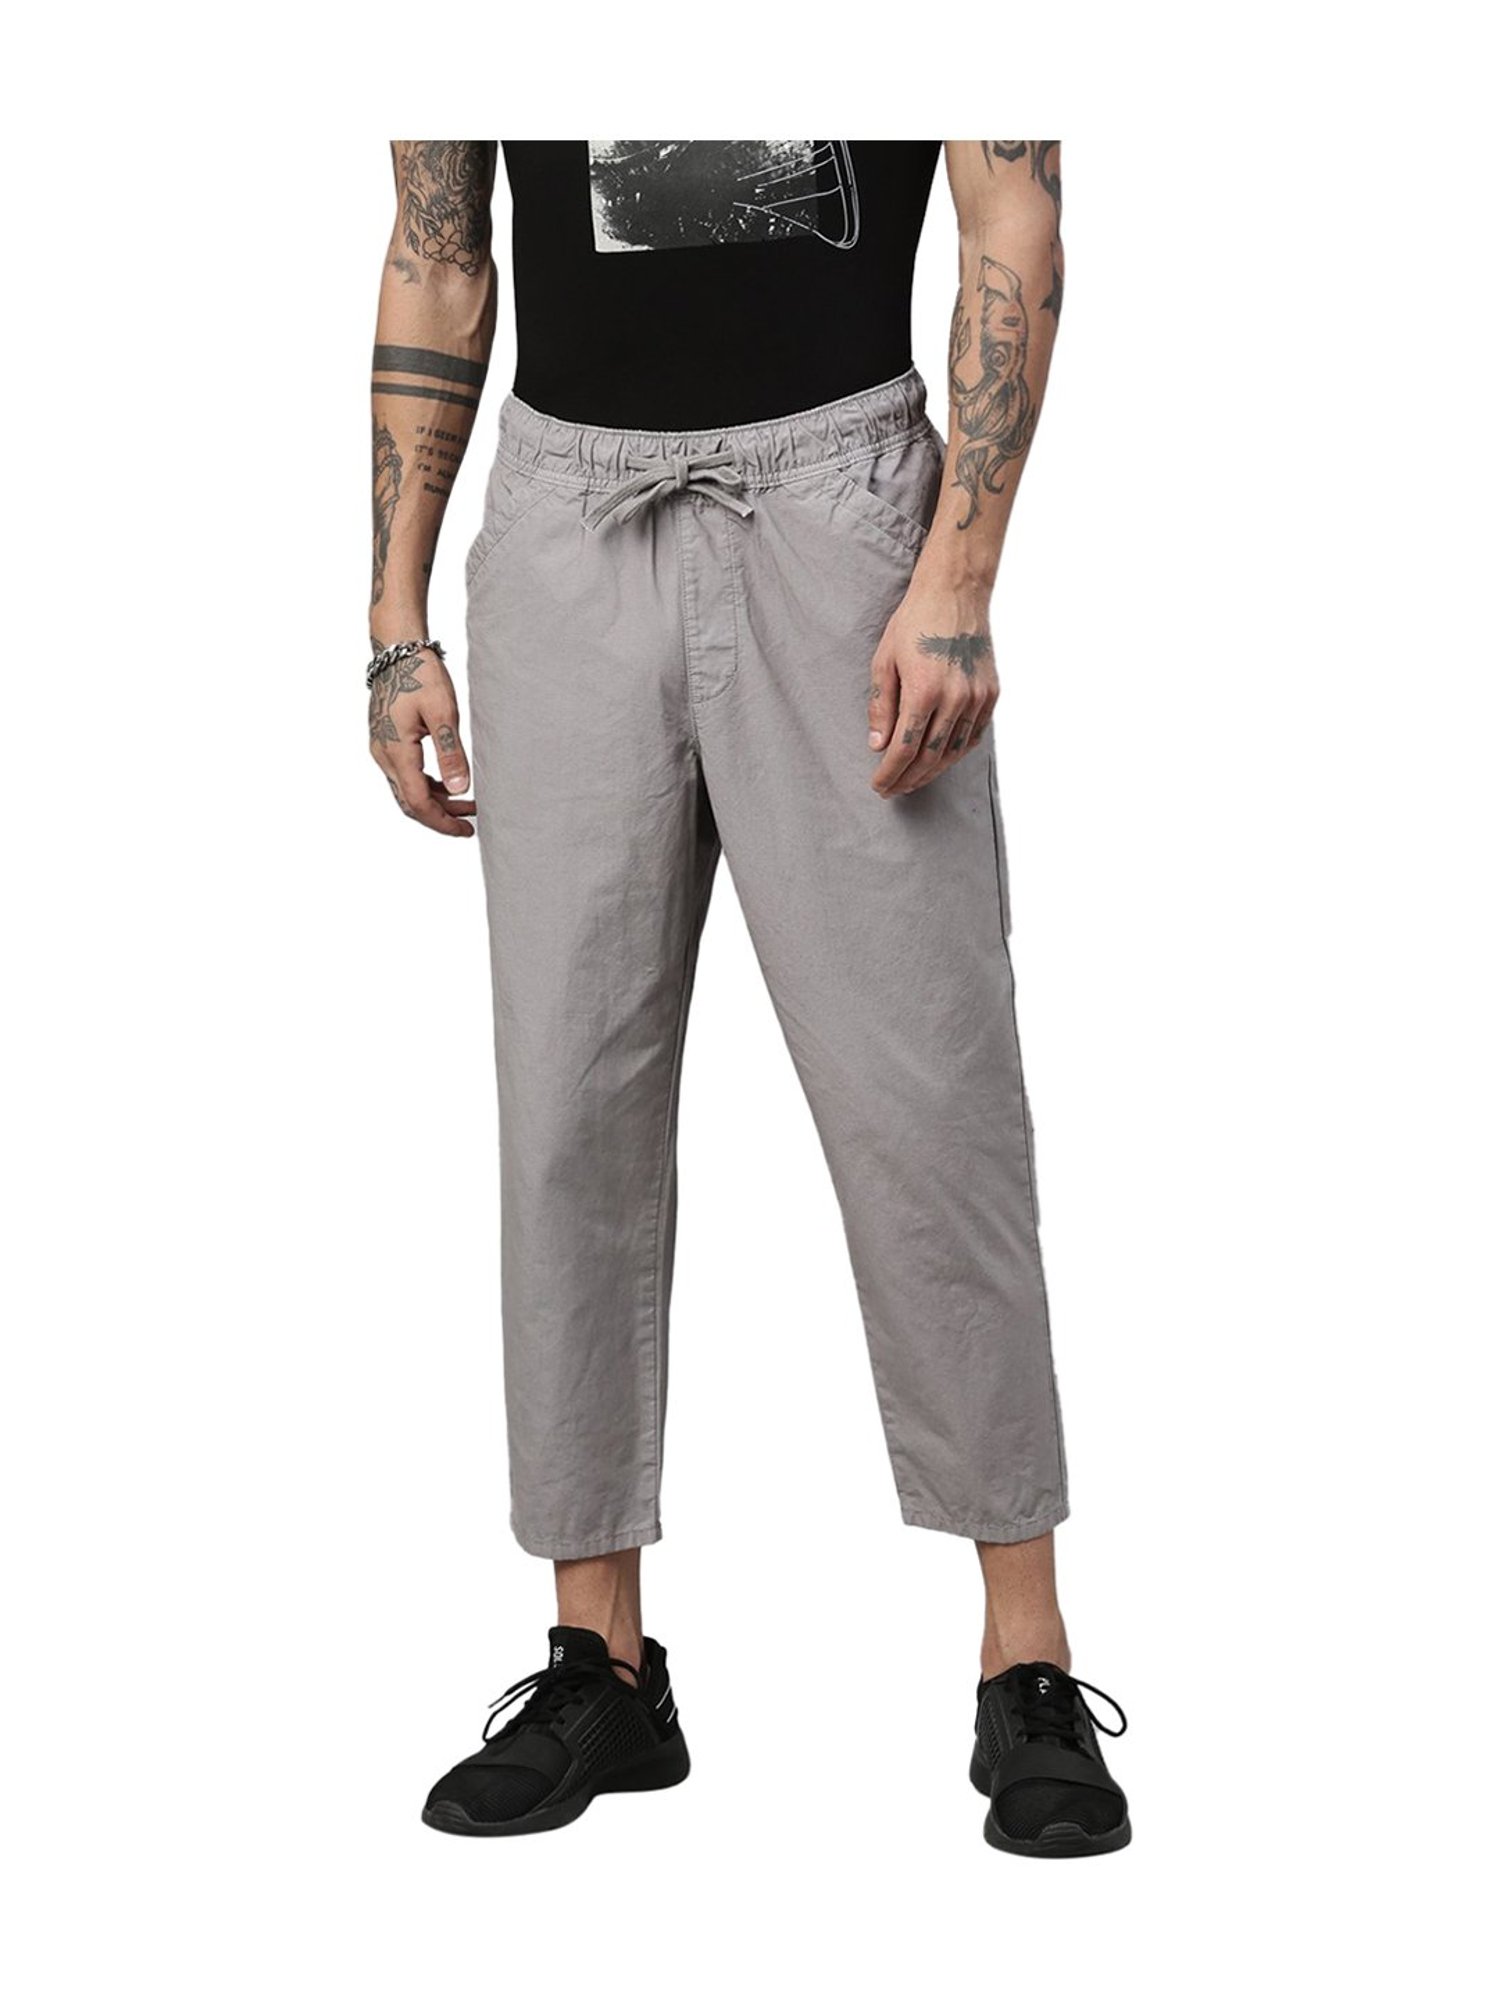 Thai Cotton Drawstring Trousers  The Hippy Clothing Co